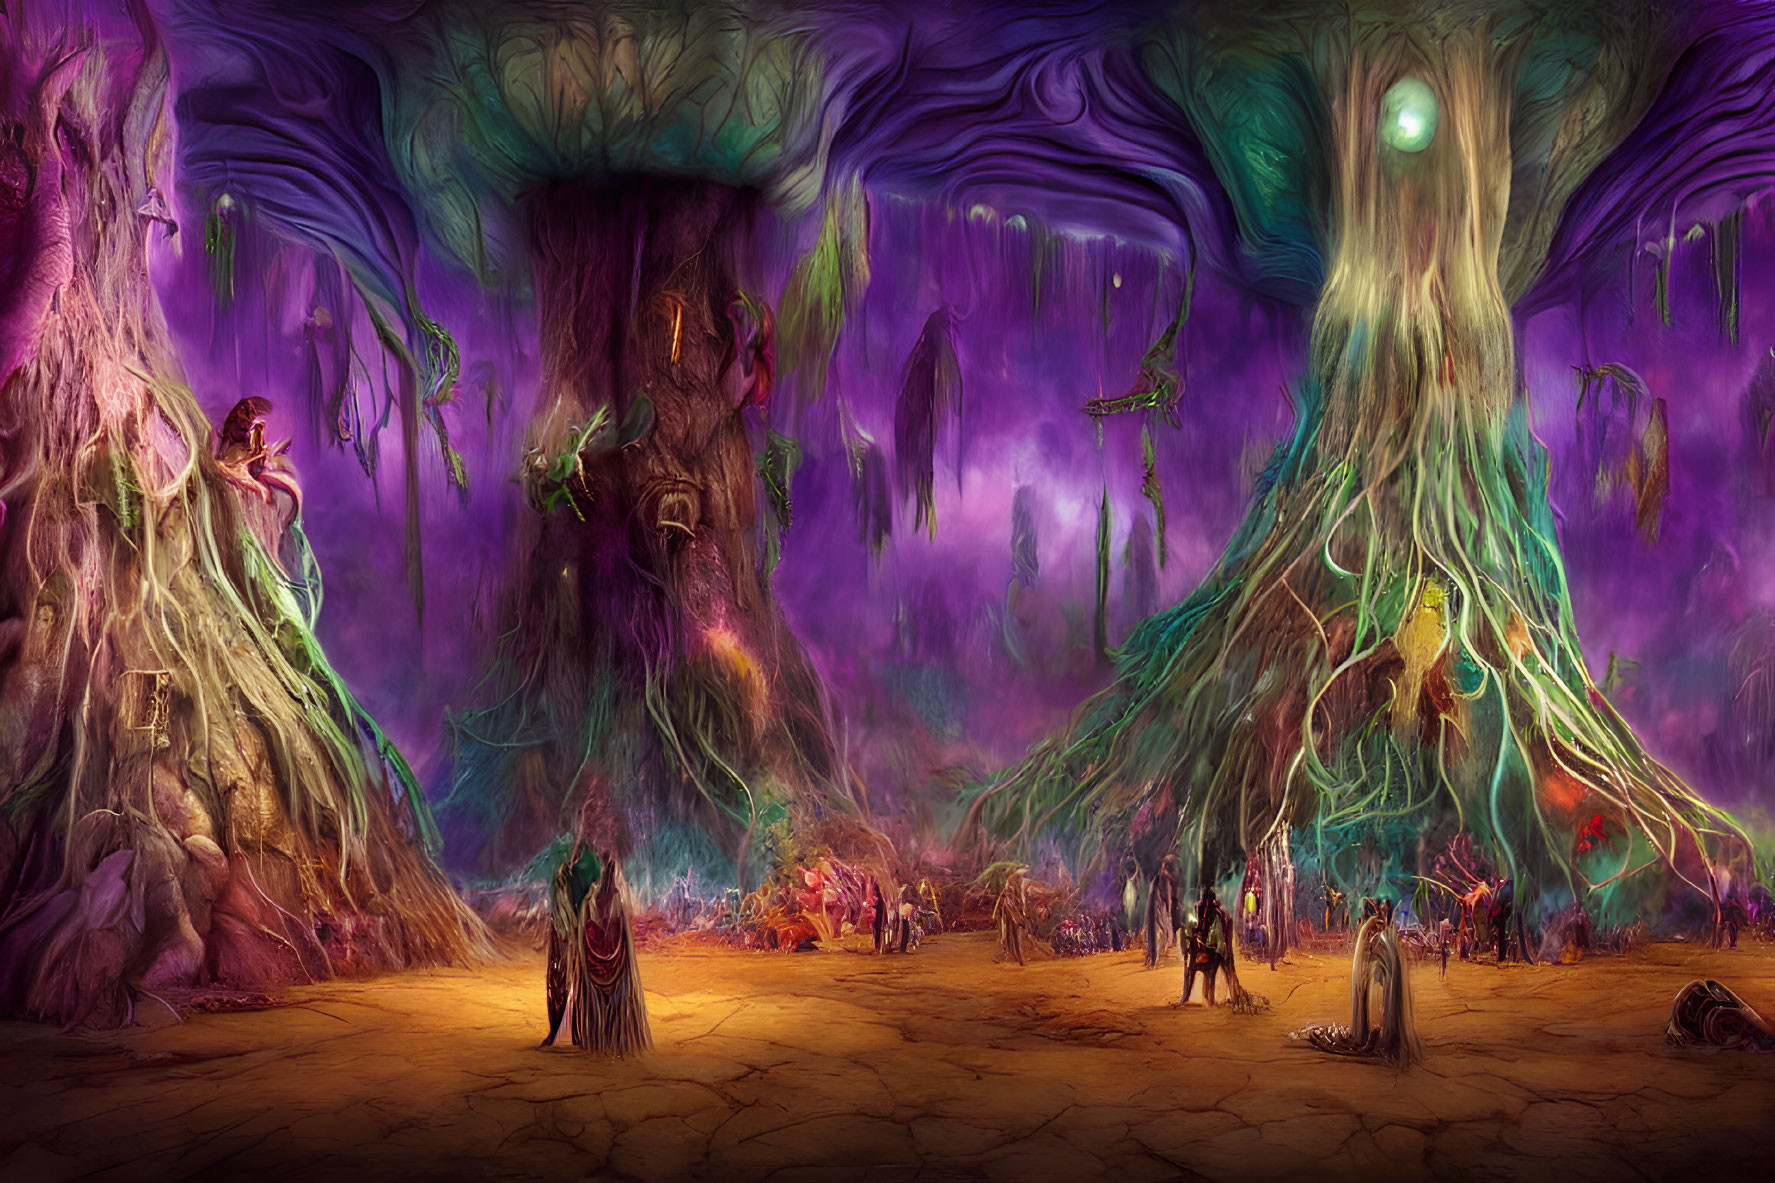 Fantastical landscape with towering trees and mystical figures in purple and green palette